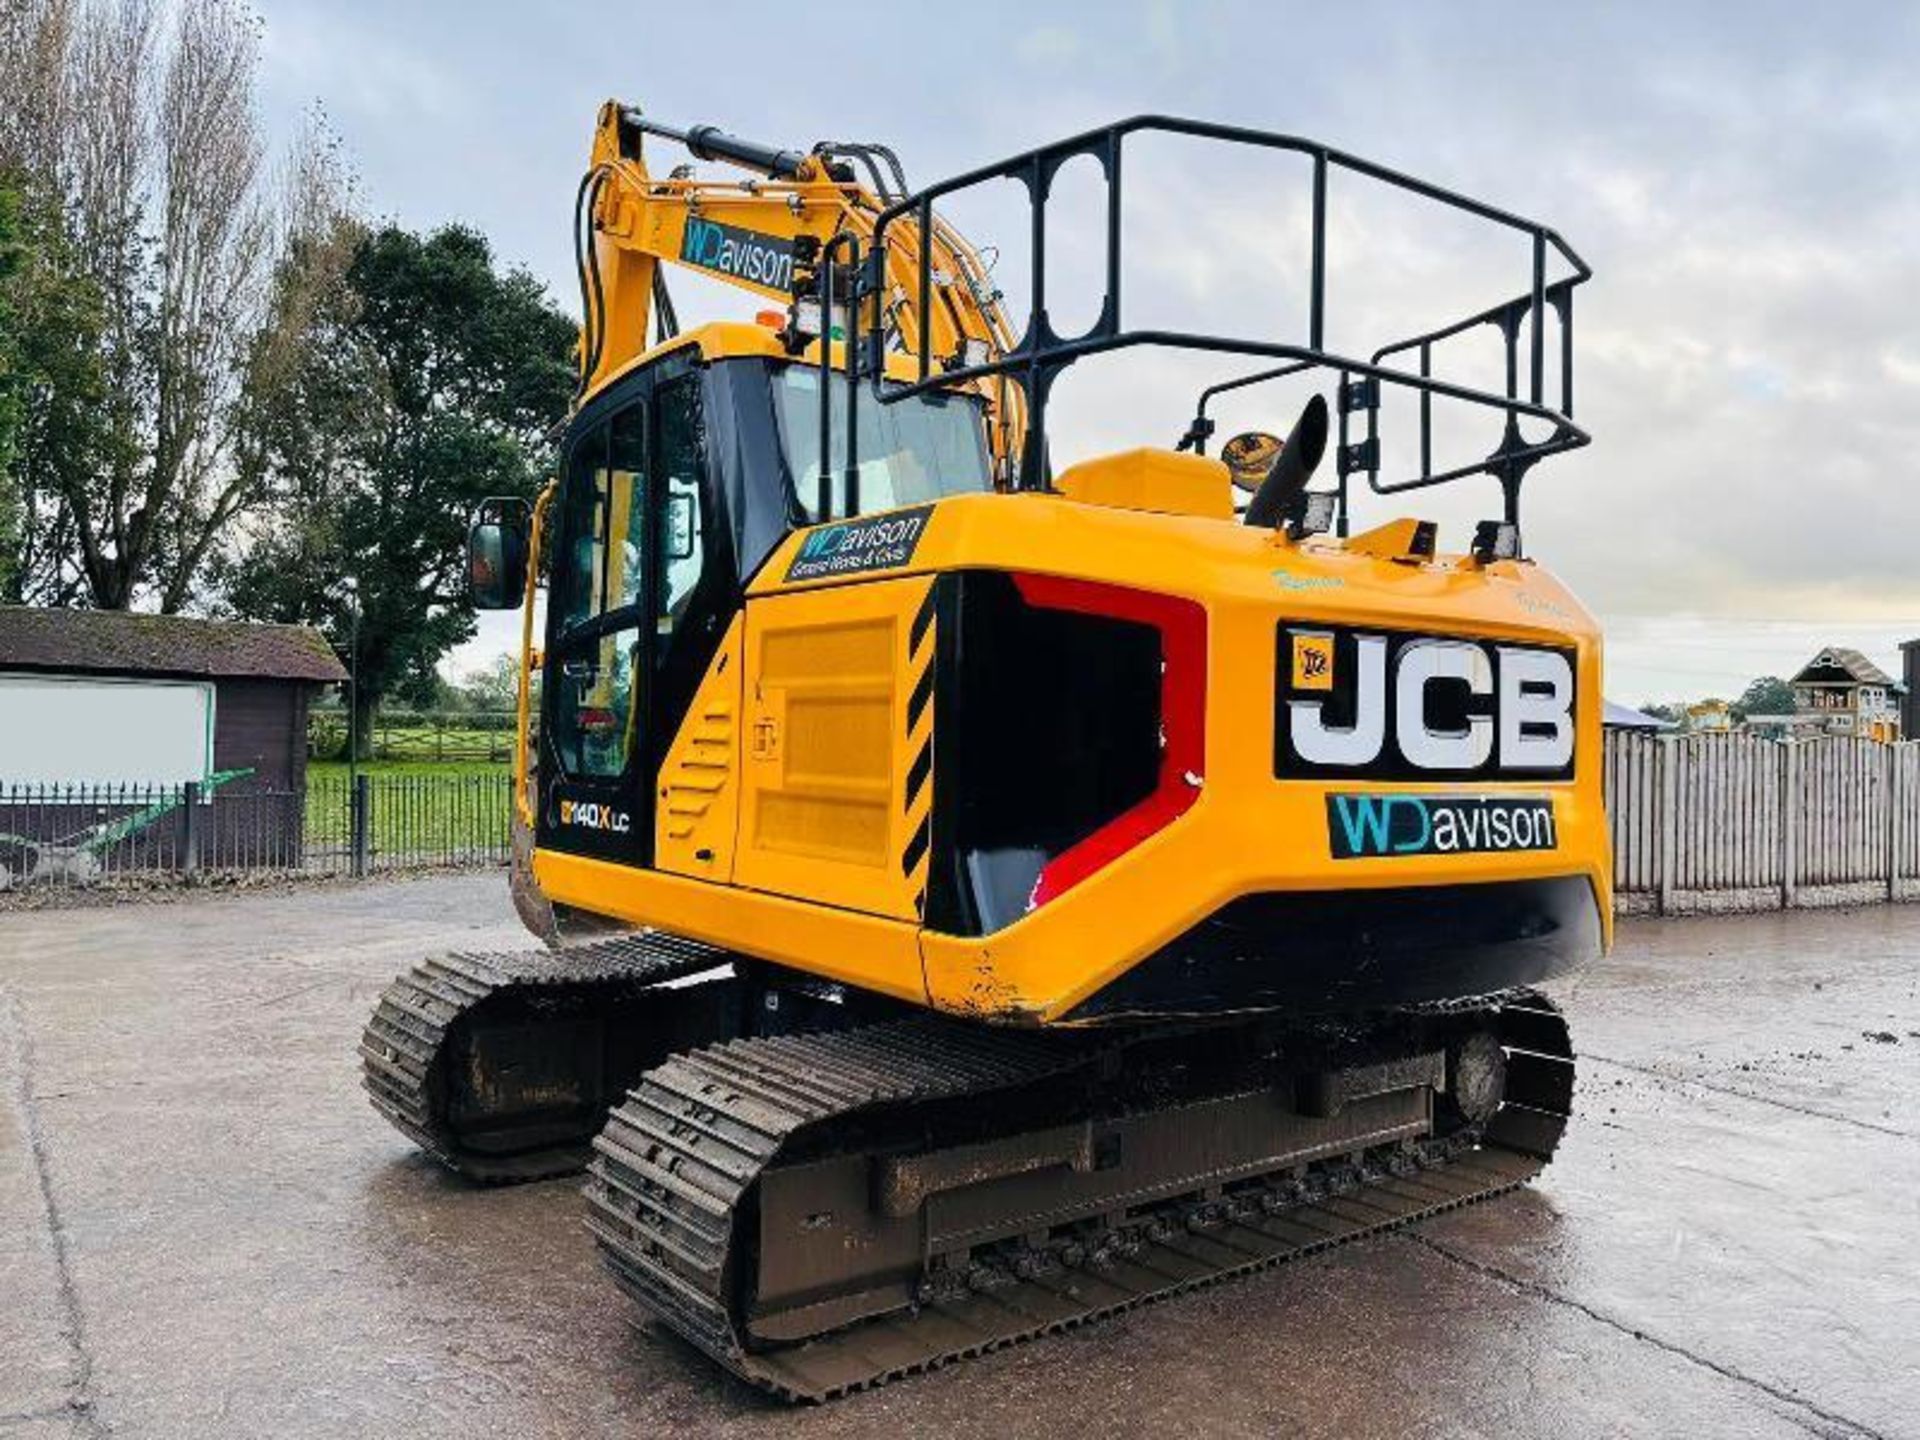 JCB 140XLC TRACKED EXCAVATOR *YEAR 2020, 3186 HOURS* C/W QUICK HITCH - Image 19 of 19